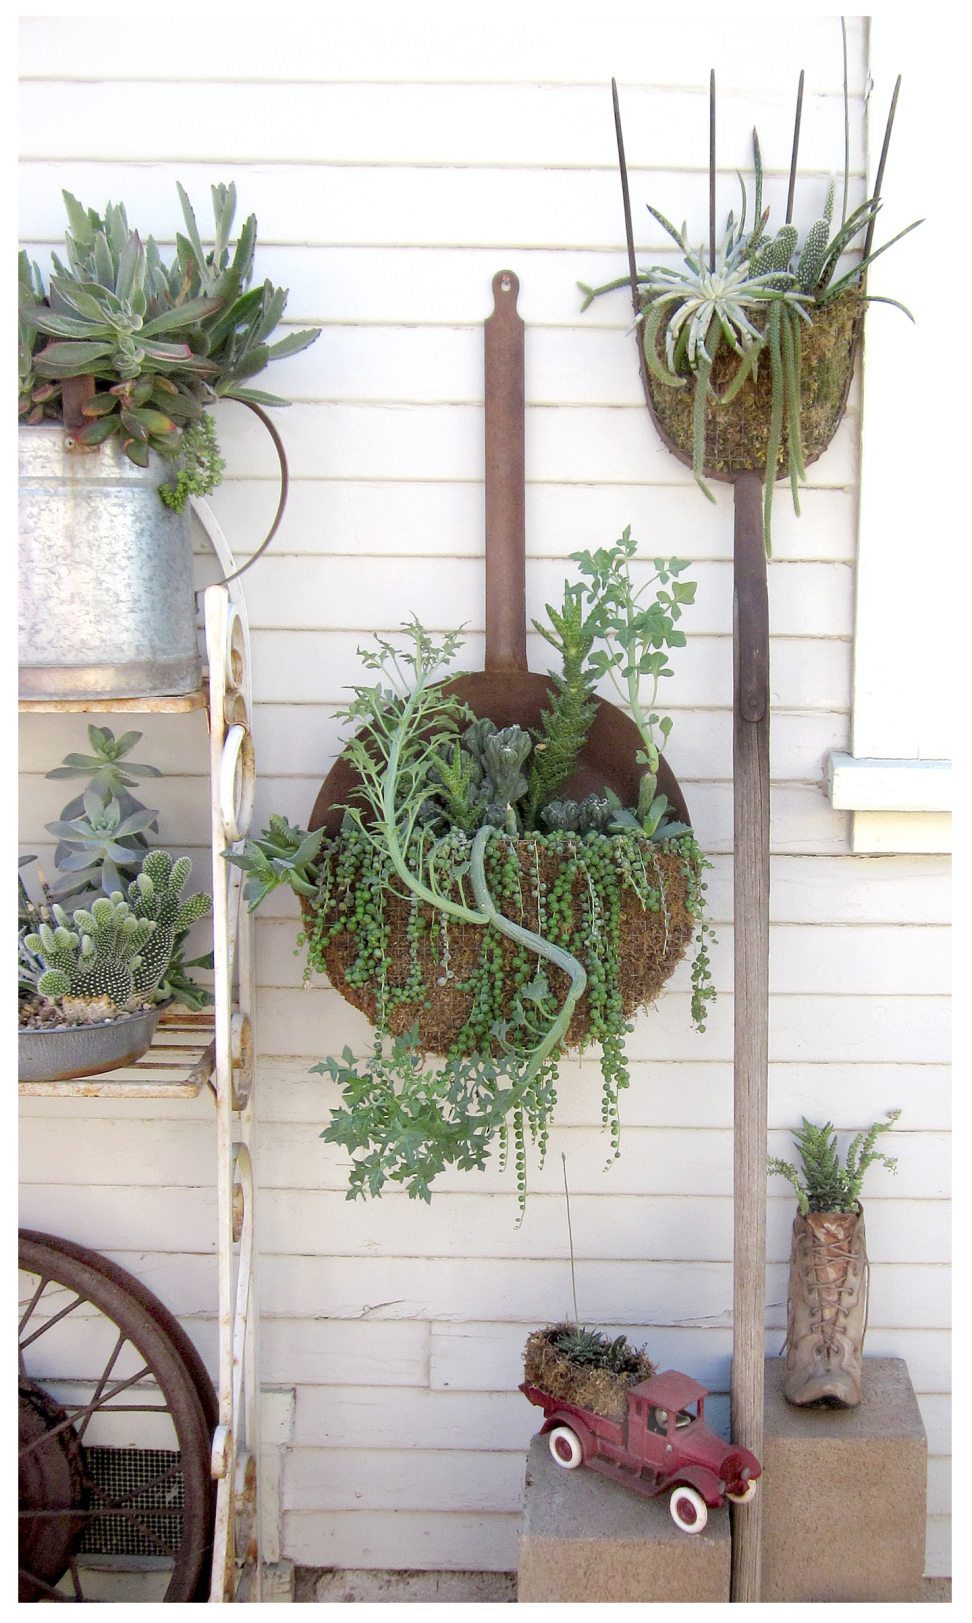 Upcycled garden ideas - rusty containers